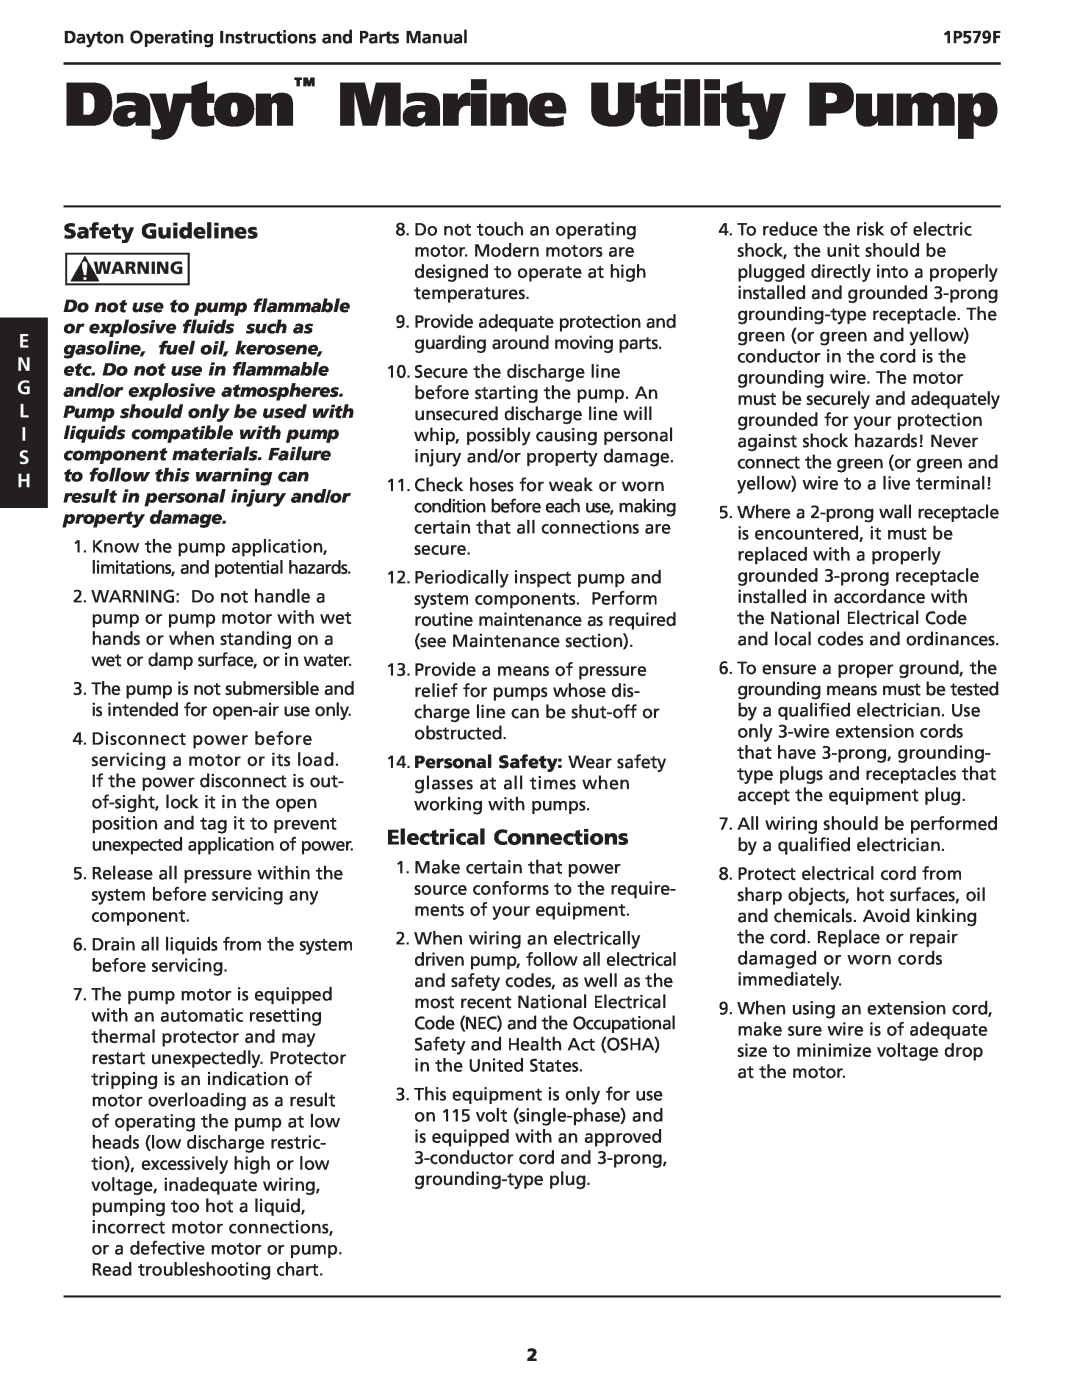 Dayton 1P579F specifications Safety Guidelines, Electrical Connections, Dayton Operating Instructions and Parts Manual 